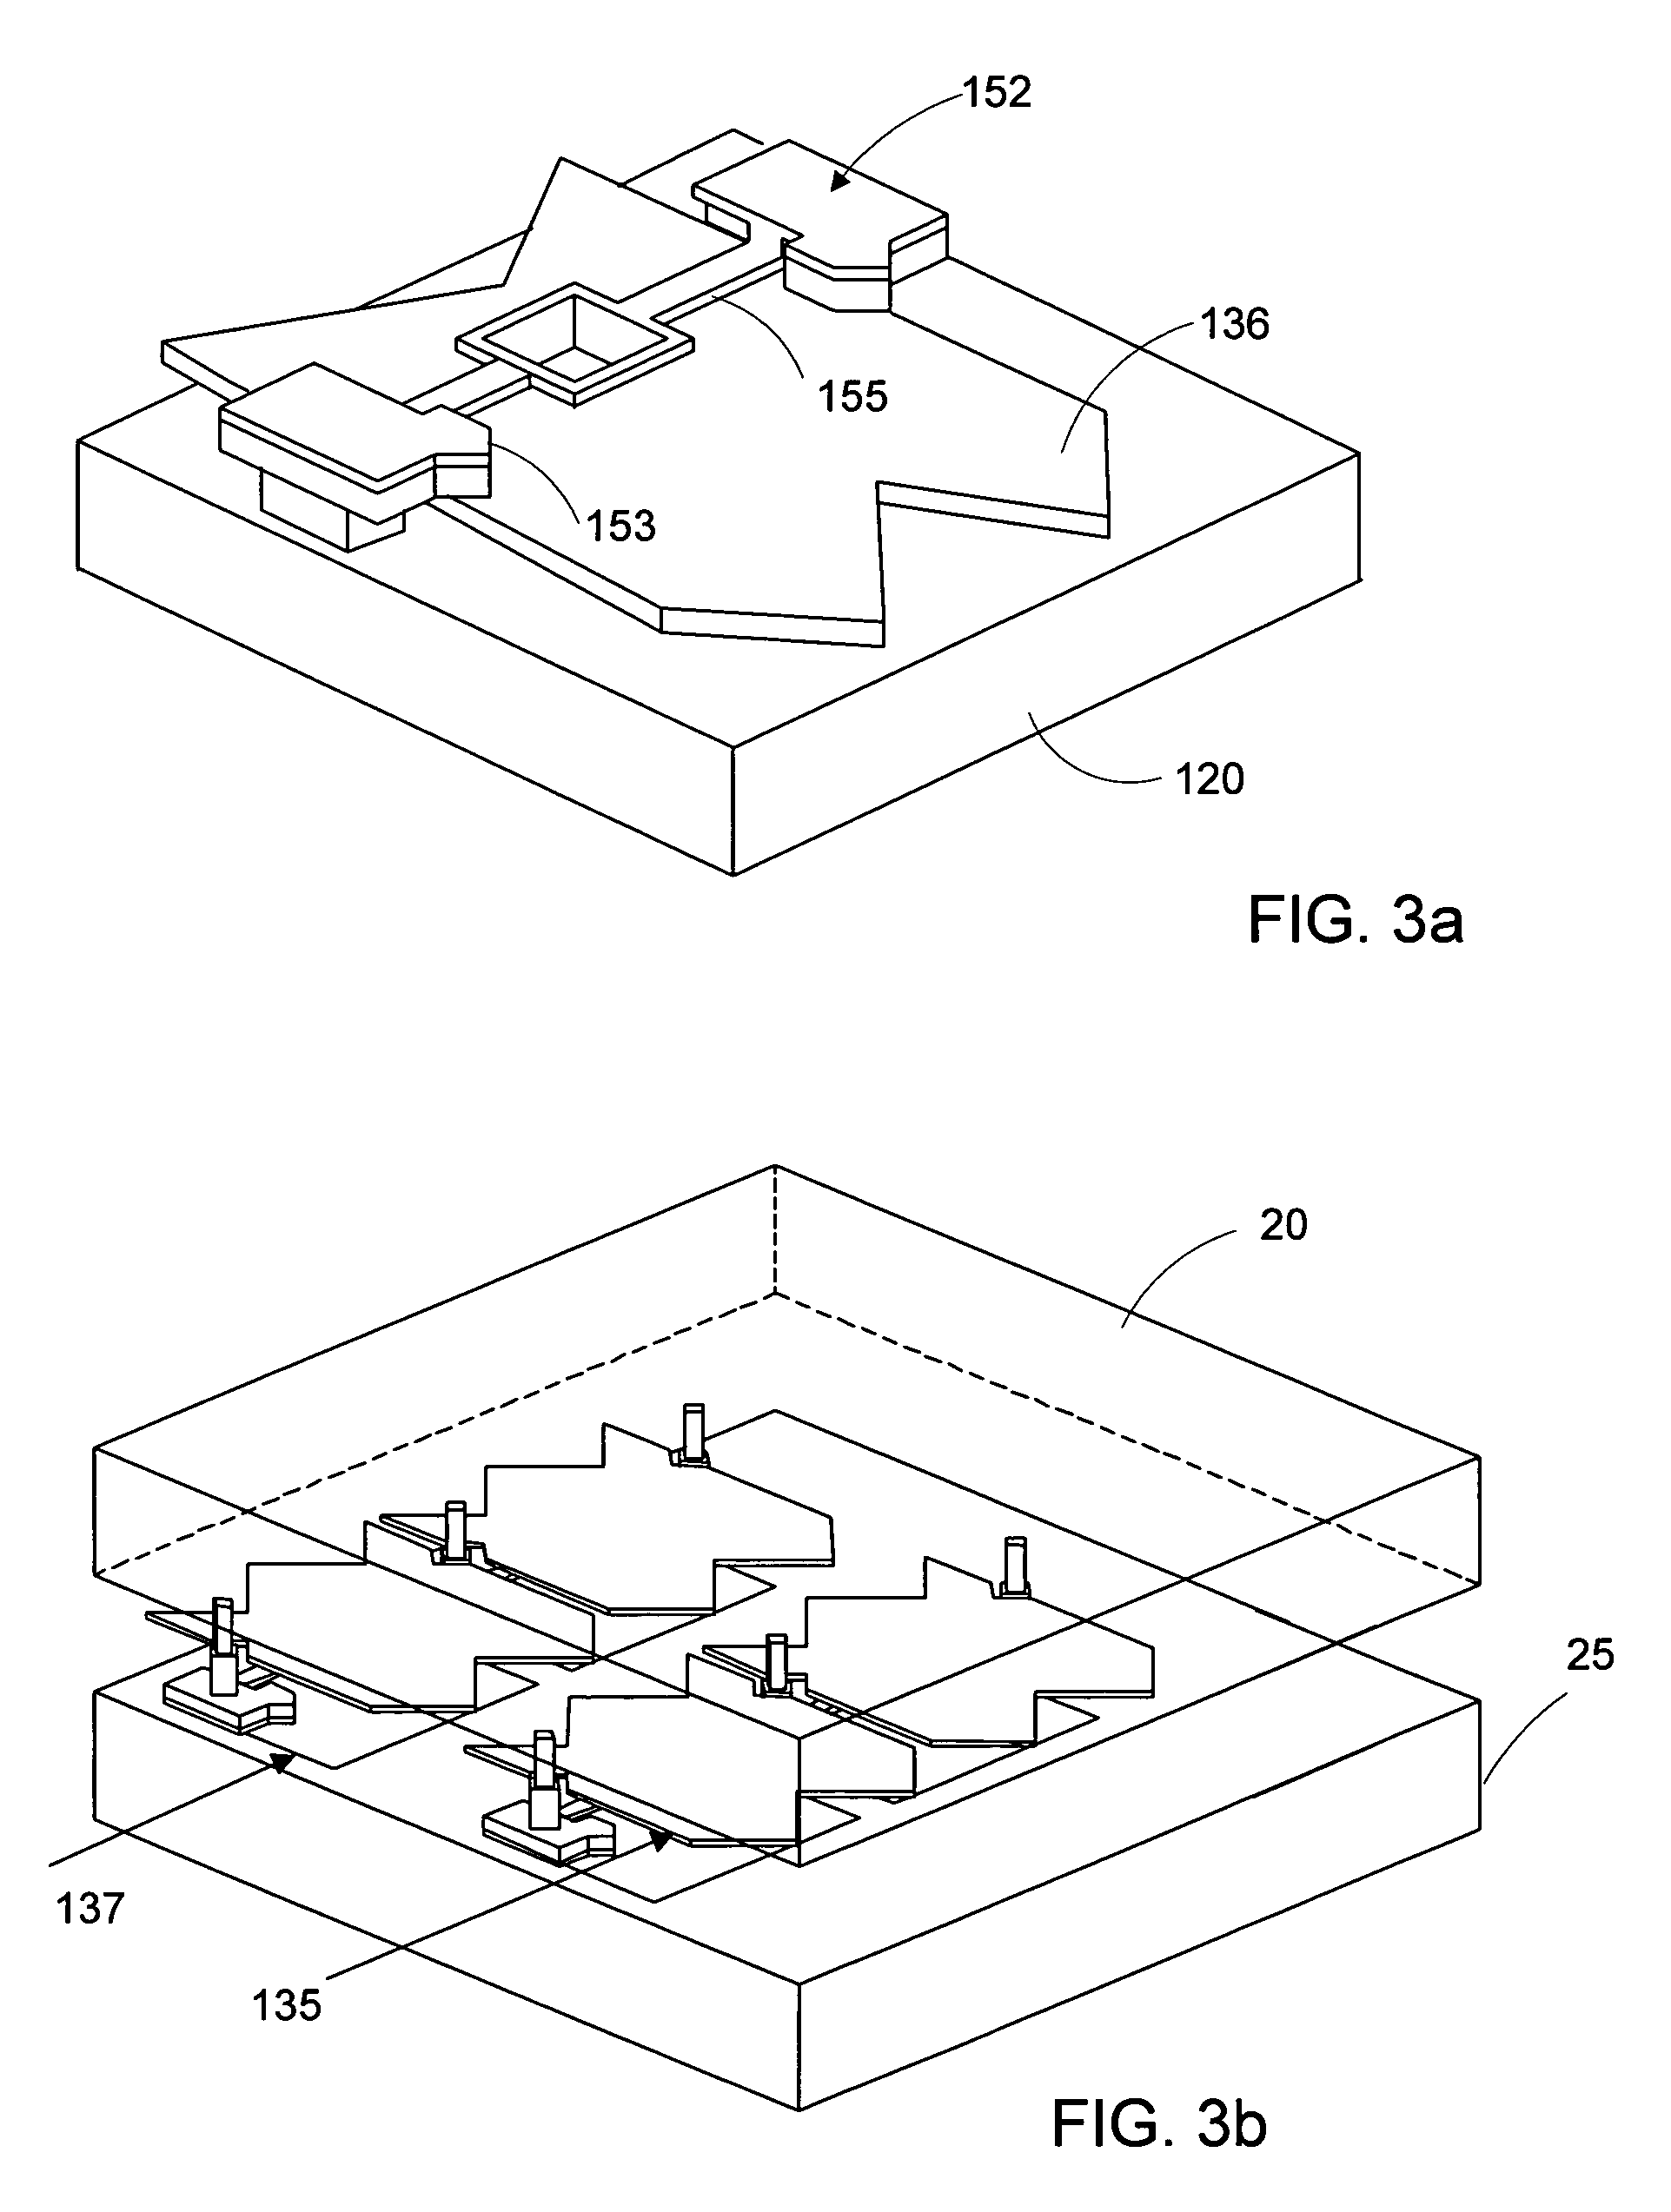 Optical materials in packaging micromirror devices